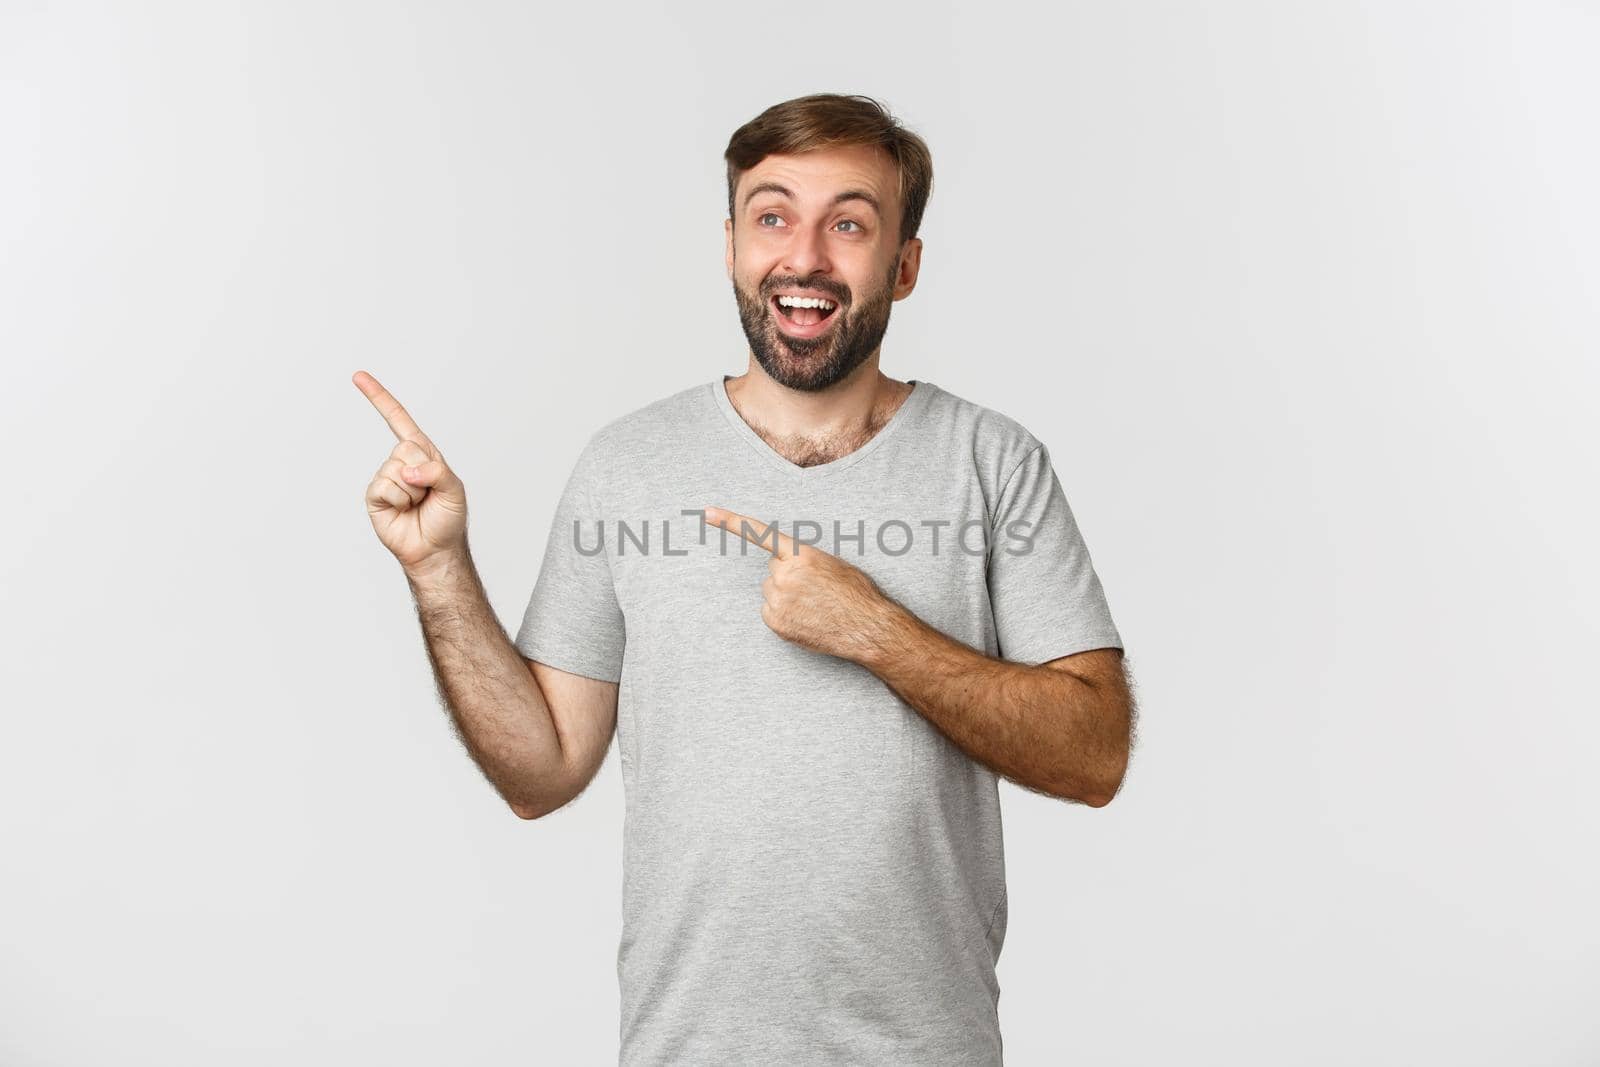 Handsome smiling man in gray t-shirt, looking happy and excited at upper left corner, showing logo, standing over white background.